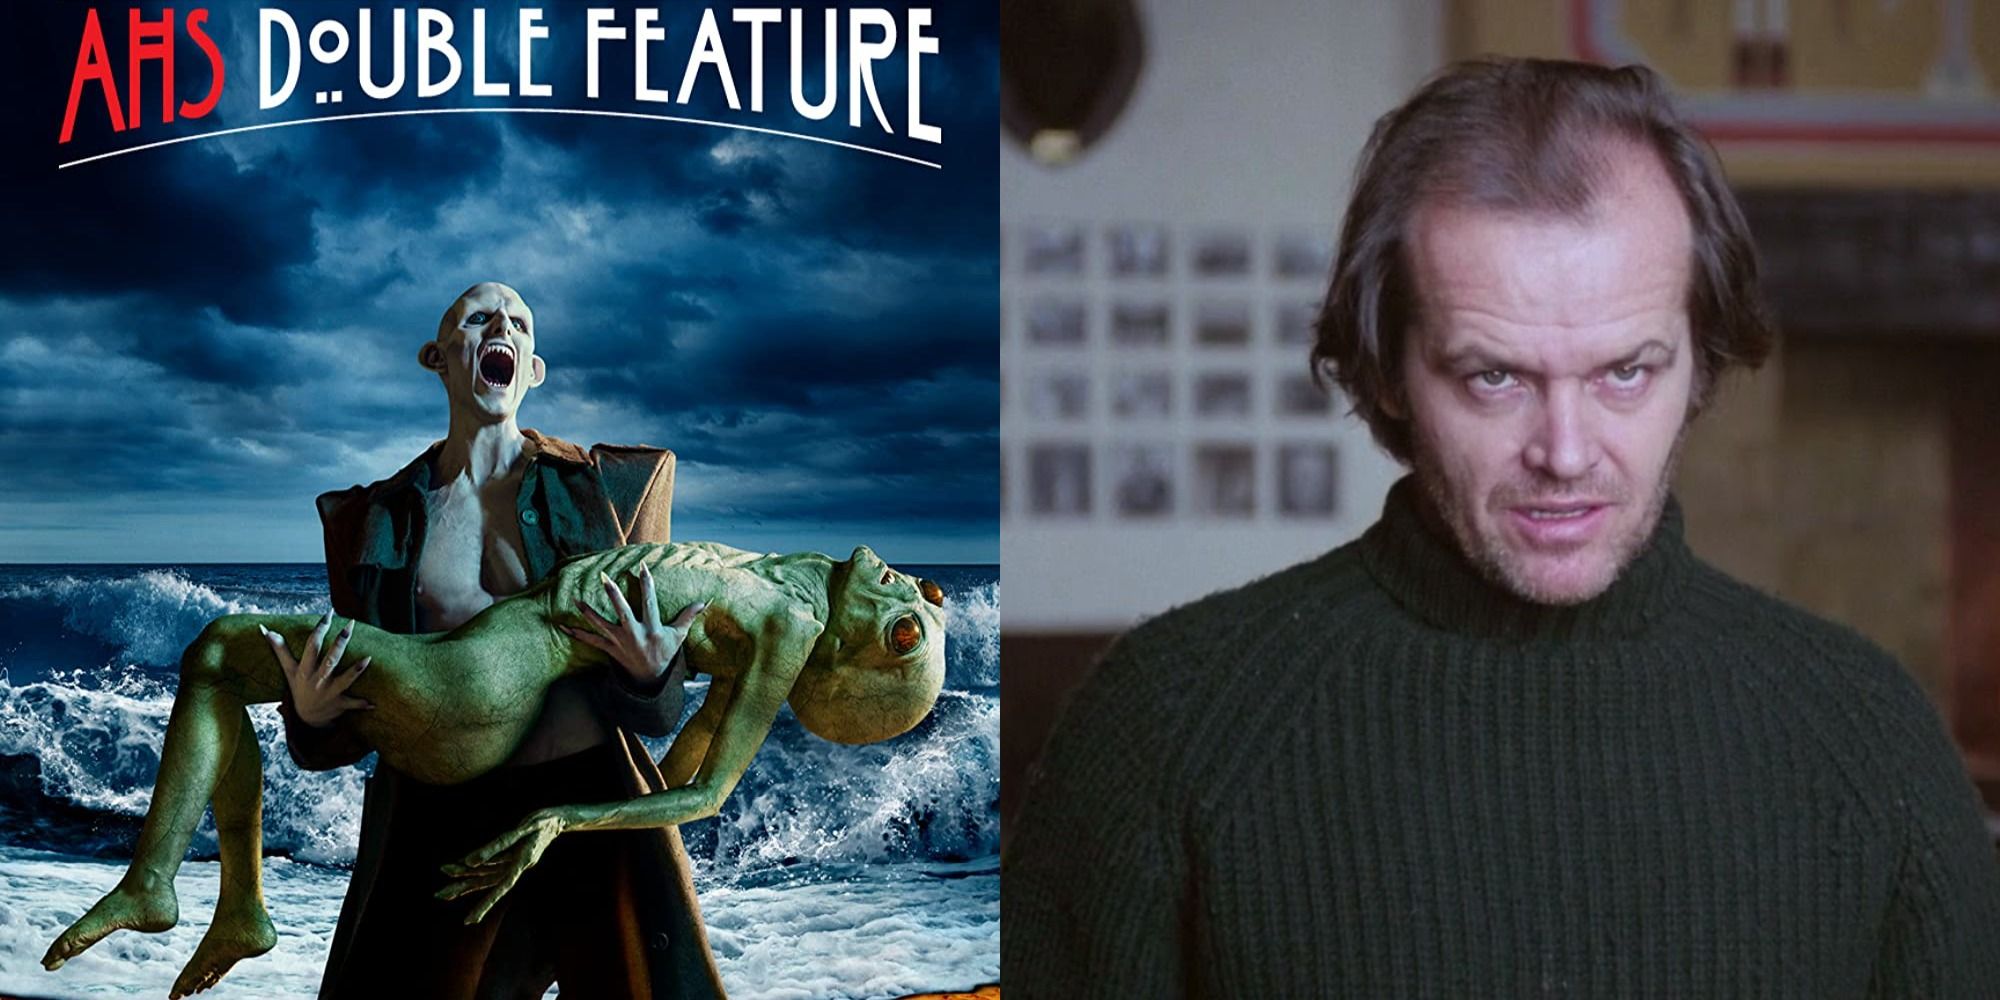 Split image showing a poster from AHS Double Feature and Jack Torrance in The Shining